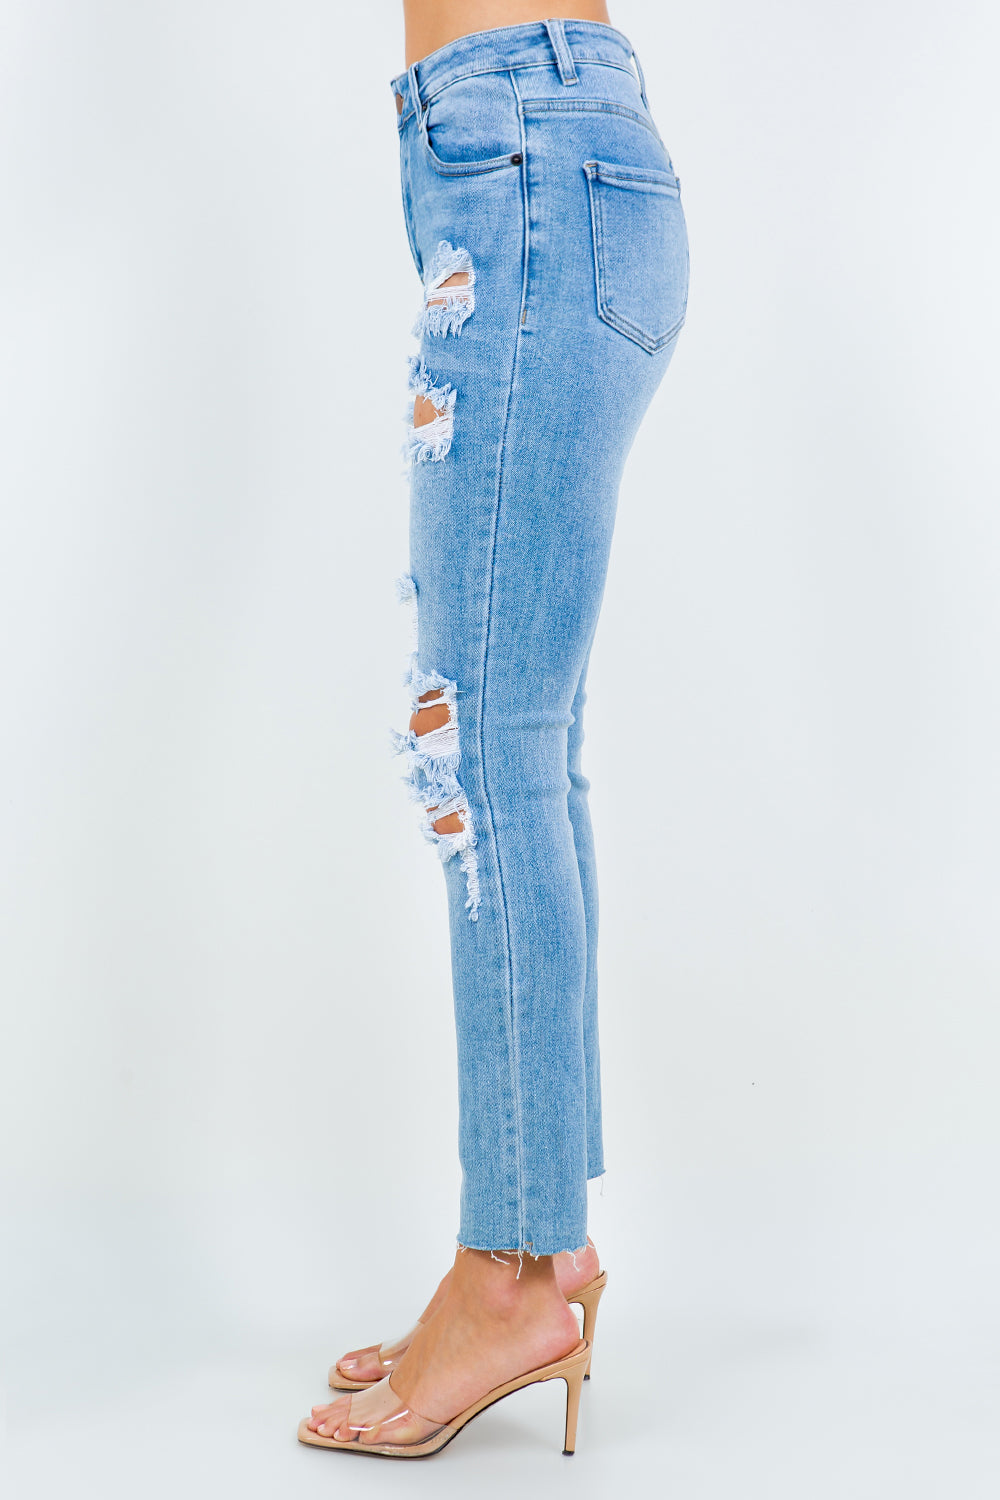 American Bazi High Waist Destroyed Jeans